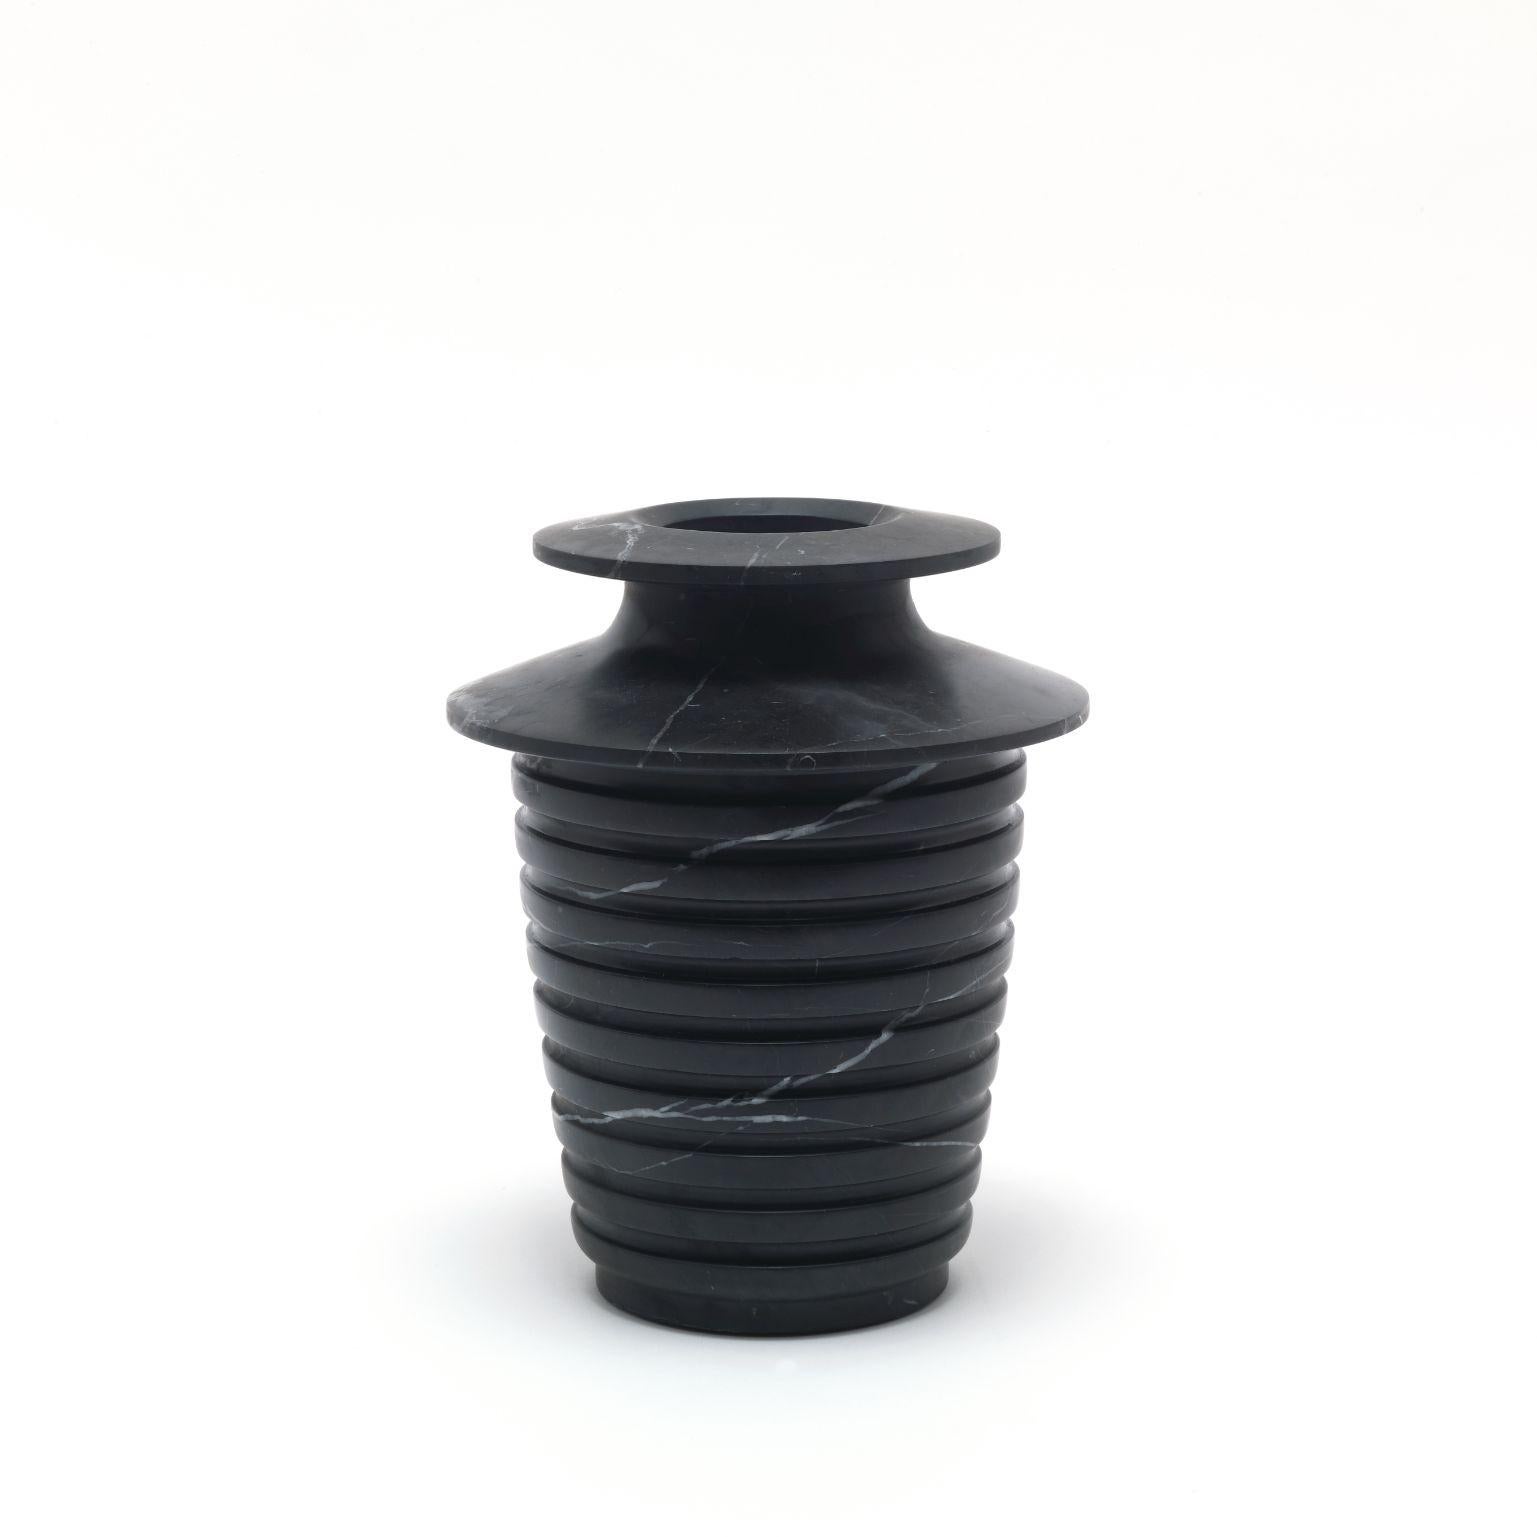 Capua medium vase by Ivan Colominas
Capua Collection
Dimensions: 19 x 23.5 cm
Materials: Nero marquinia

Also available: Large

A vase that’s an homage to design and to marble itself: the Marquinia veins look skyward, toward the crater